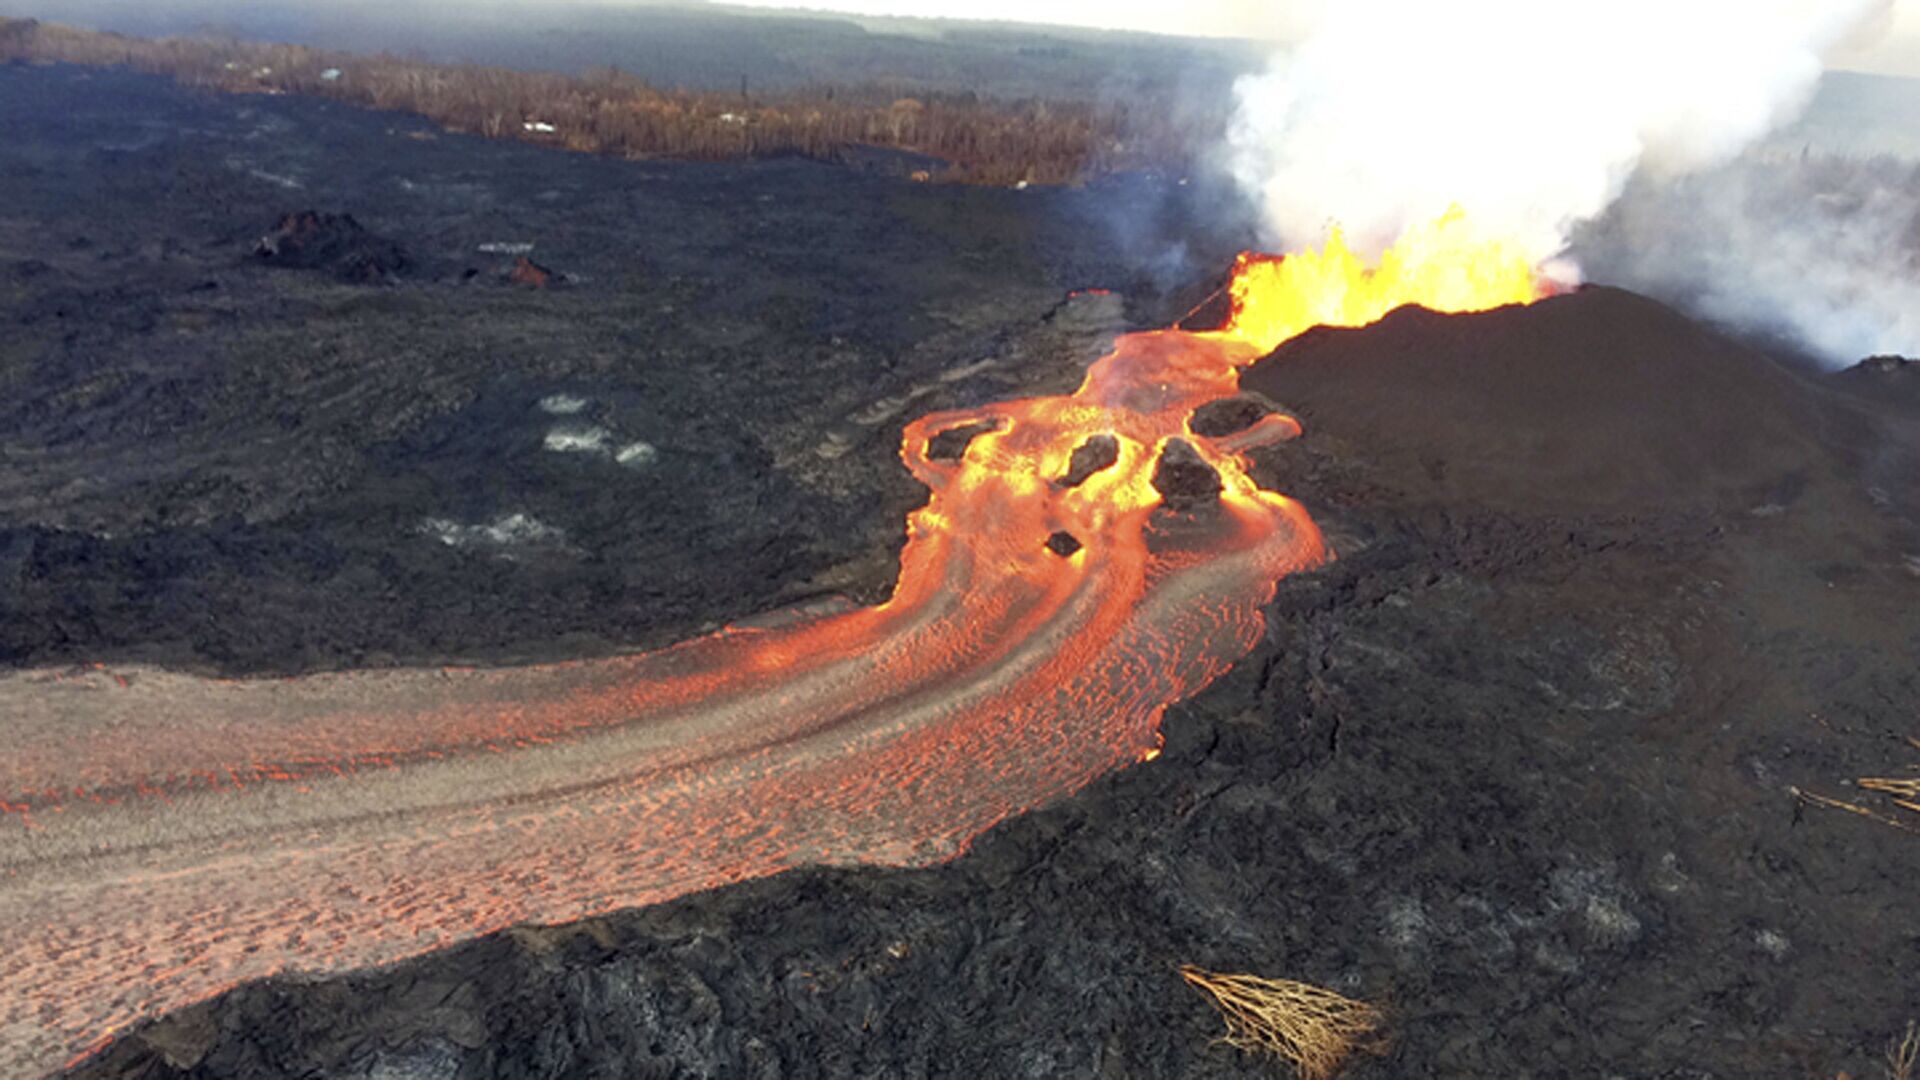 In this Sunday, June 10, 2018 photo from the U.S. Geological Survey, fissure 8 below Kilauea Volcano continues to erupt vigorously with lava streaming through a channel that reaches the ocean at Kapoho Bay on the island of Hawaii . The width of the active part of the lava channel varies along its length, but ranges from about 100 to 300 meters (yards) wide. A clear view of the cinder-and-spatter cone that's building around the vent from ongoing lava fountains can be seen here. - Sputnik International, 1920, 30.05.2022